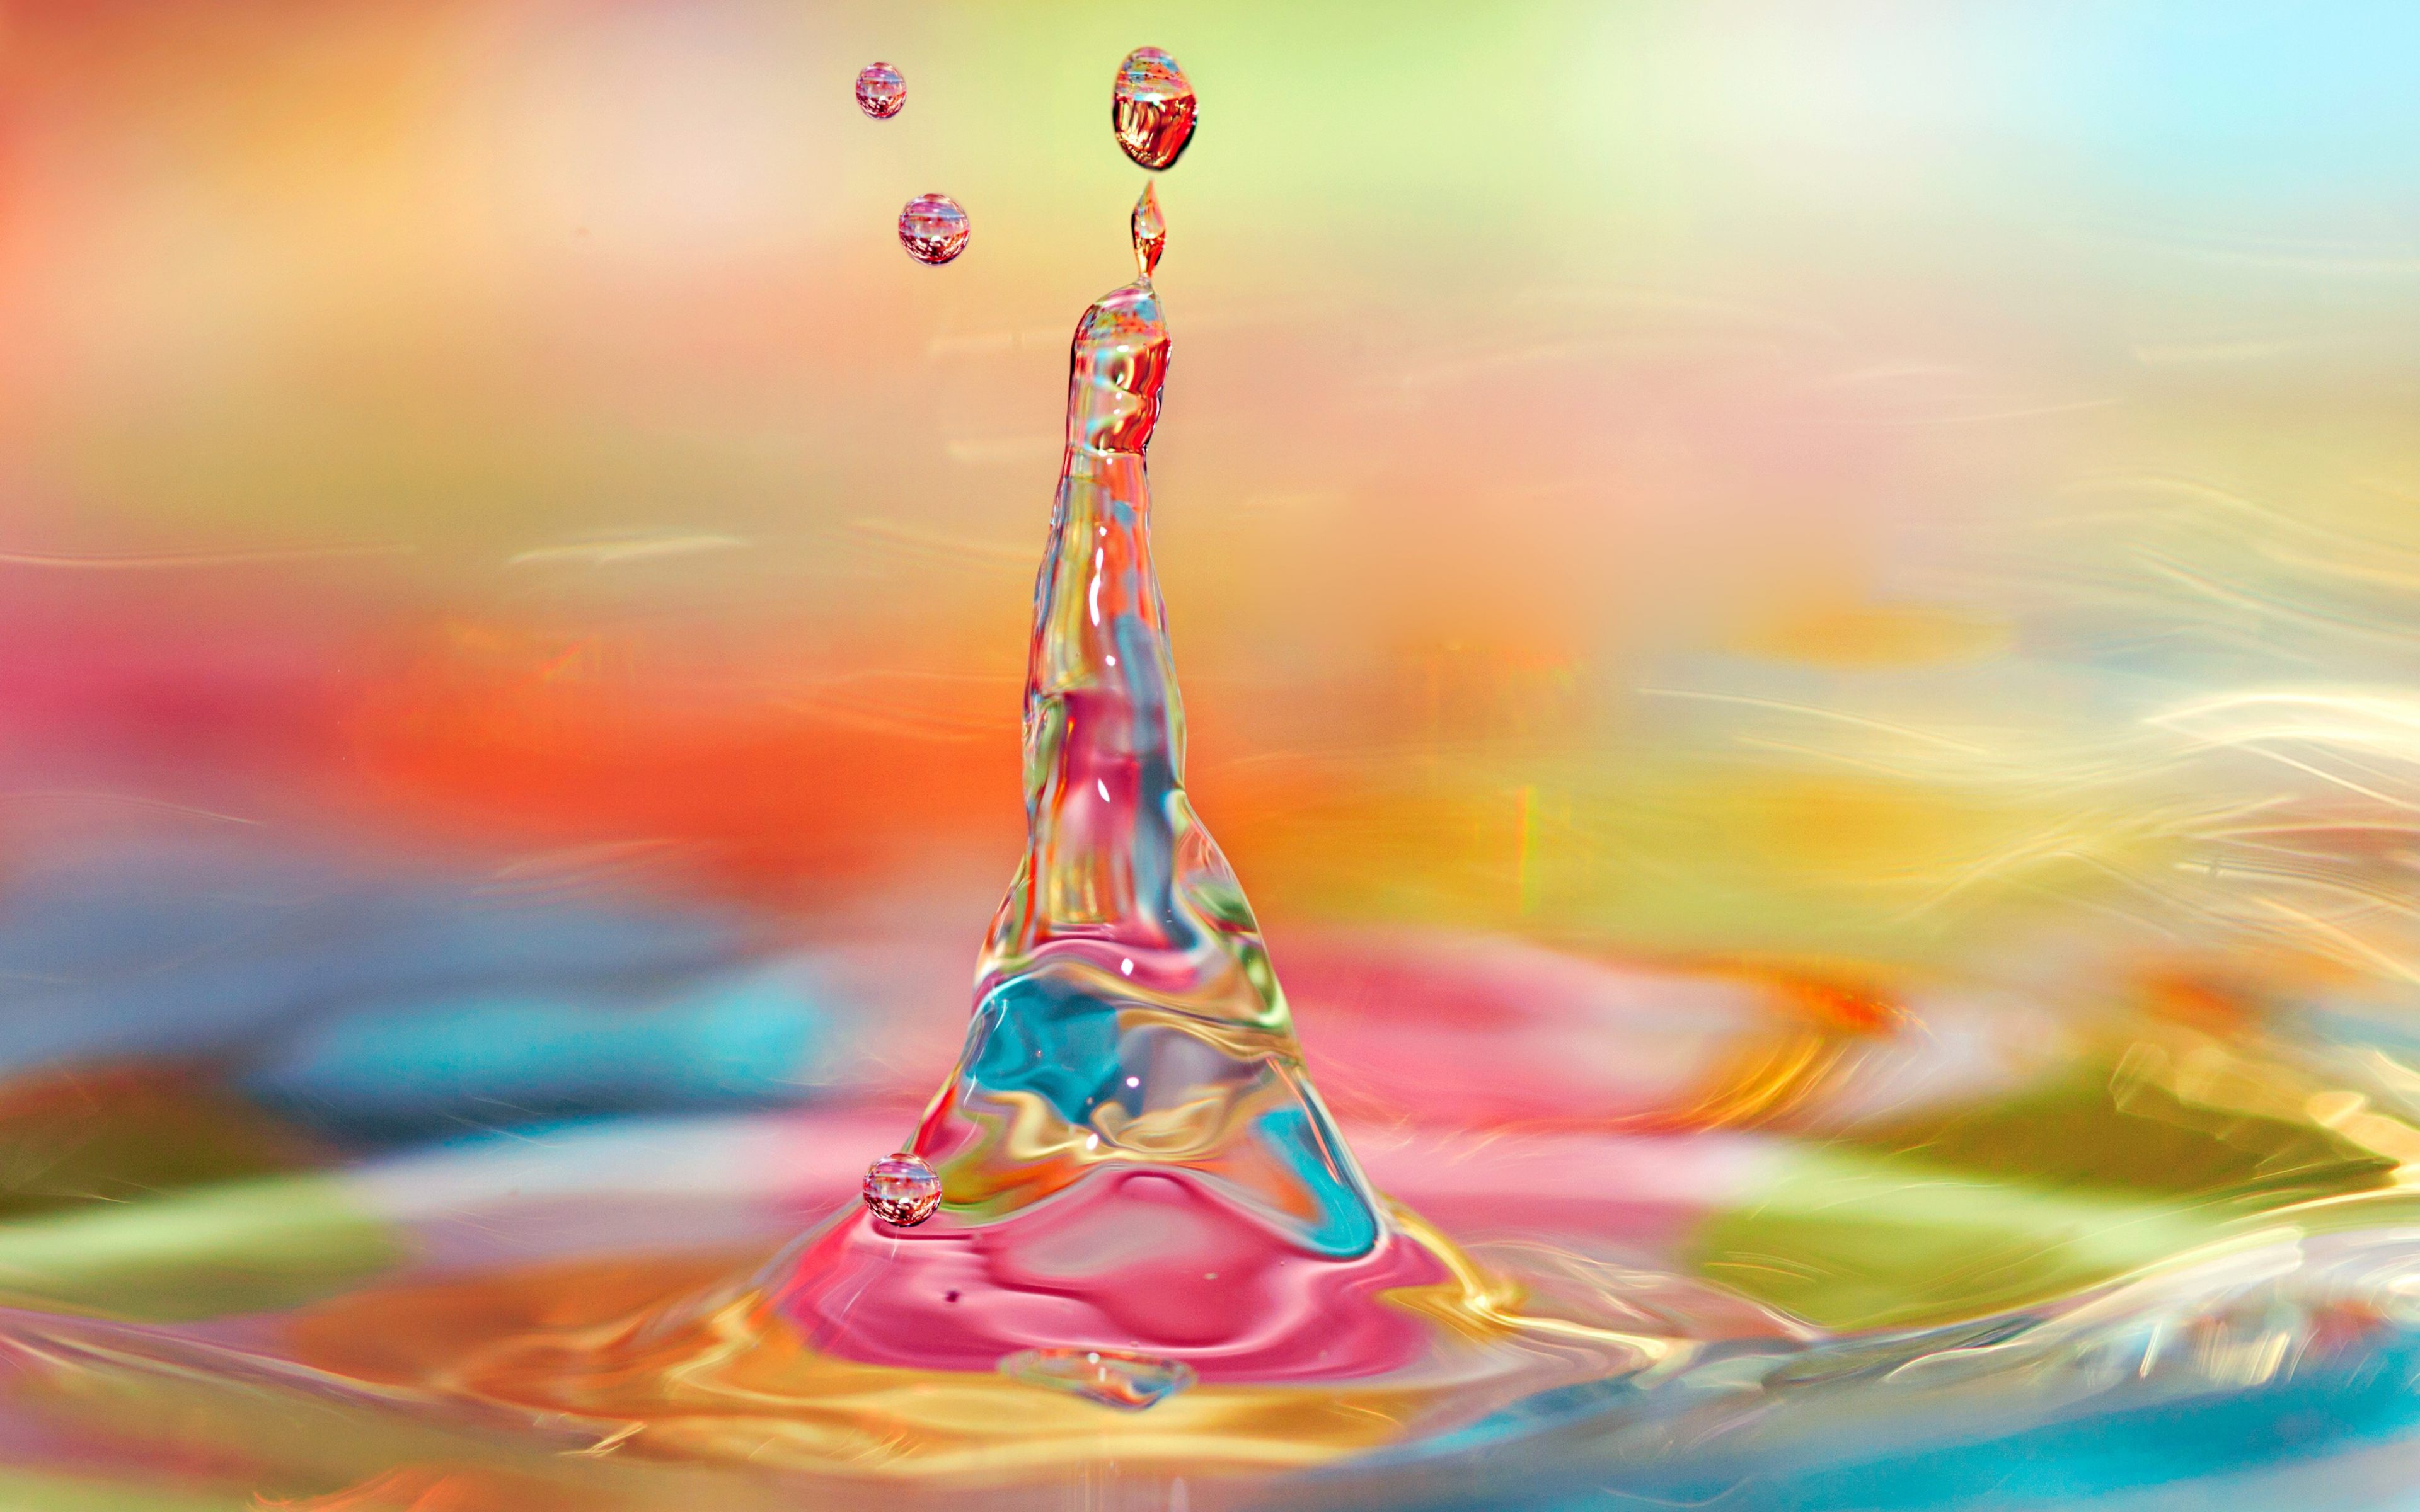 Colorful water art   colorful background 4k UHD wallpaper